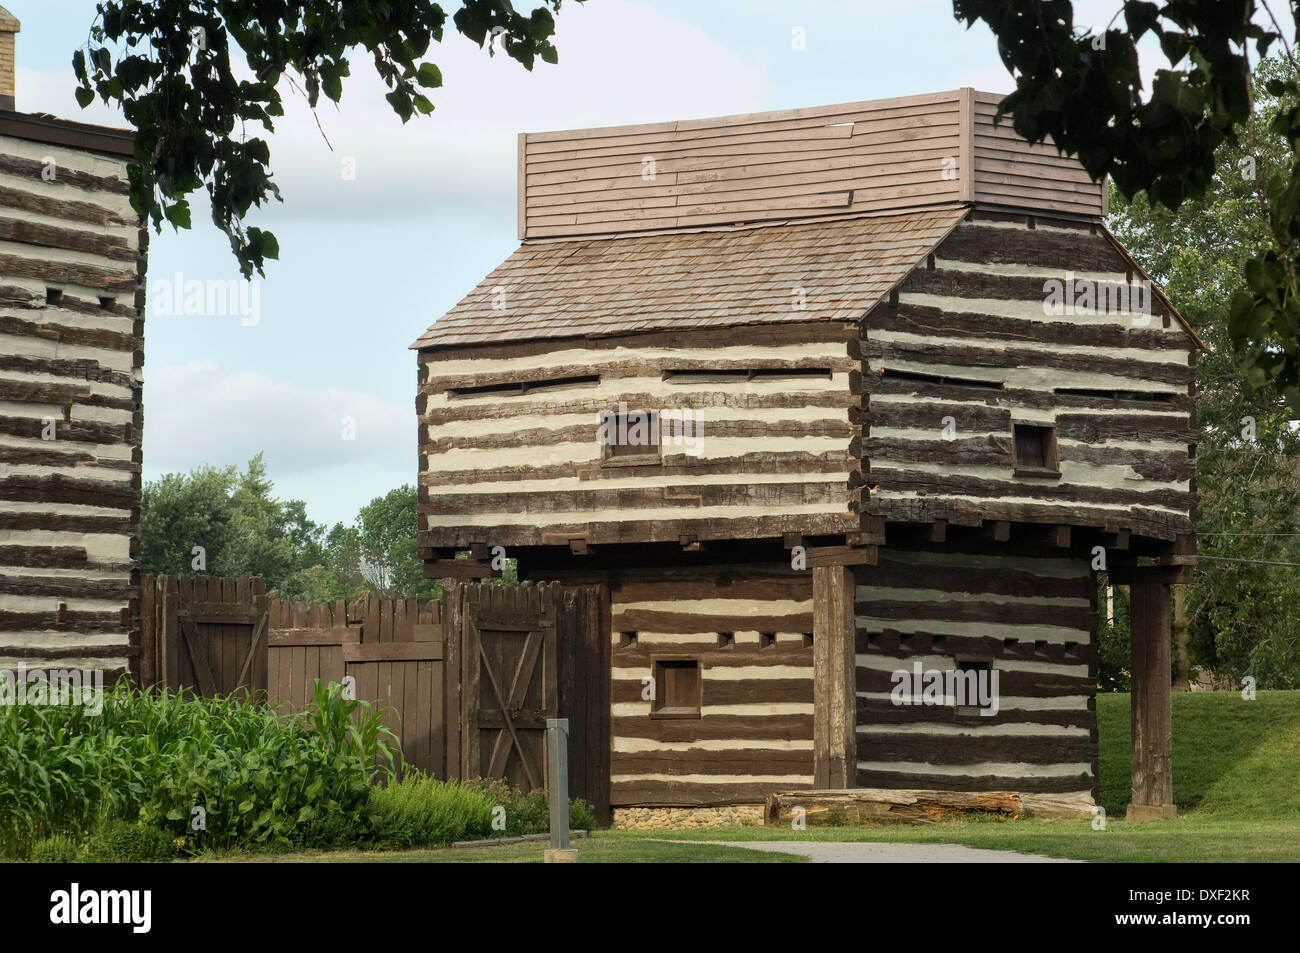 Replica of old Fort Wayne blockhouse, built in 1815 on the Maumee River, Ft Wayne, Indiana. Digital photograph Stock Photo